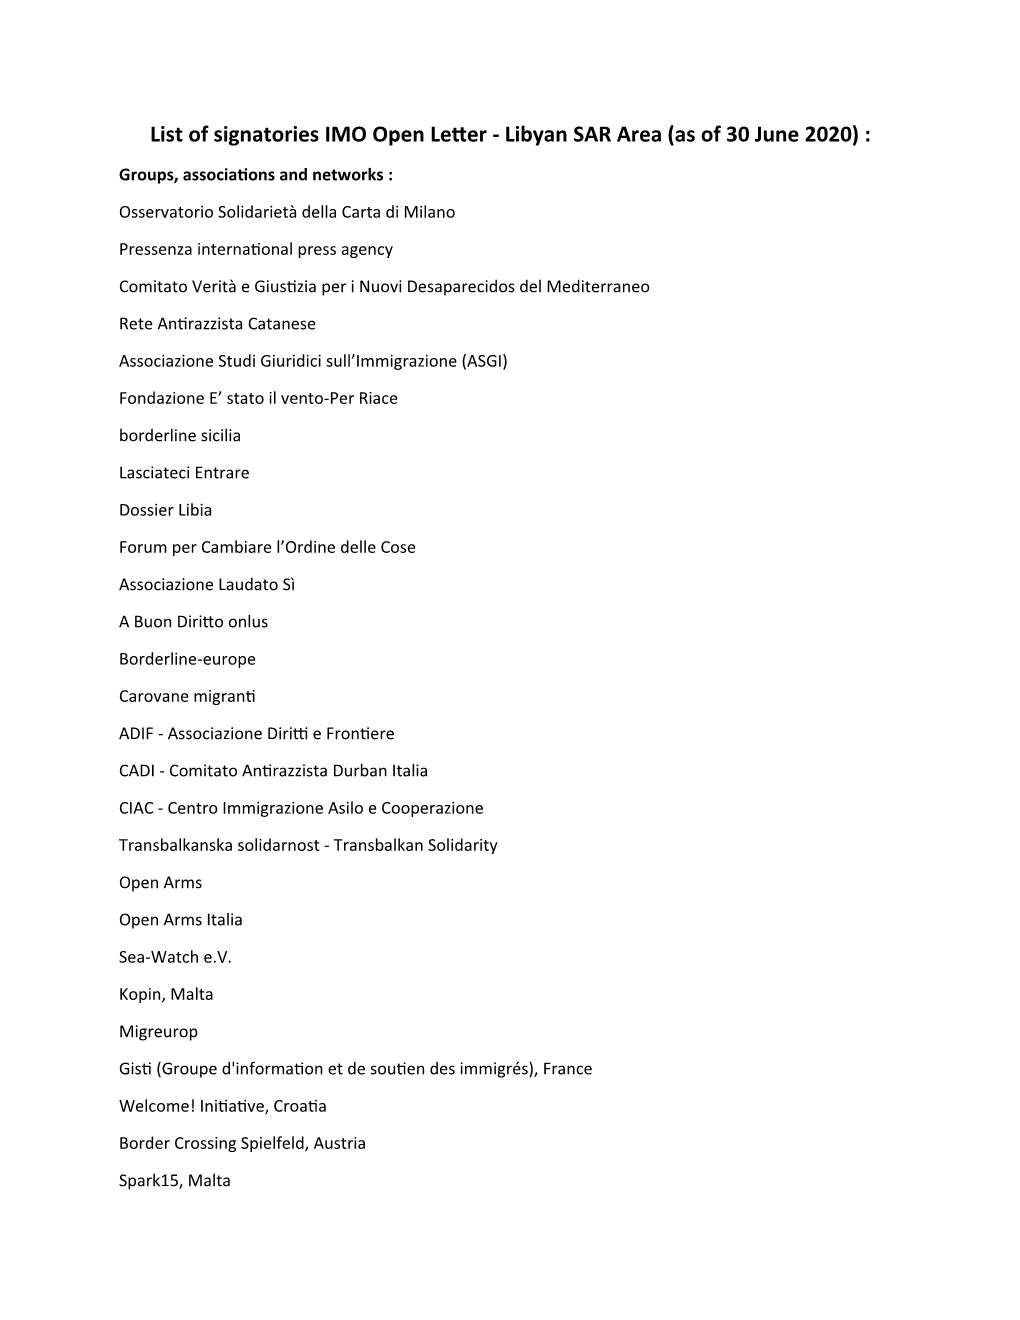 List of Signatories IMO Open Letter - Libyan SAR Area(As of 30 June 2020)